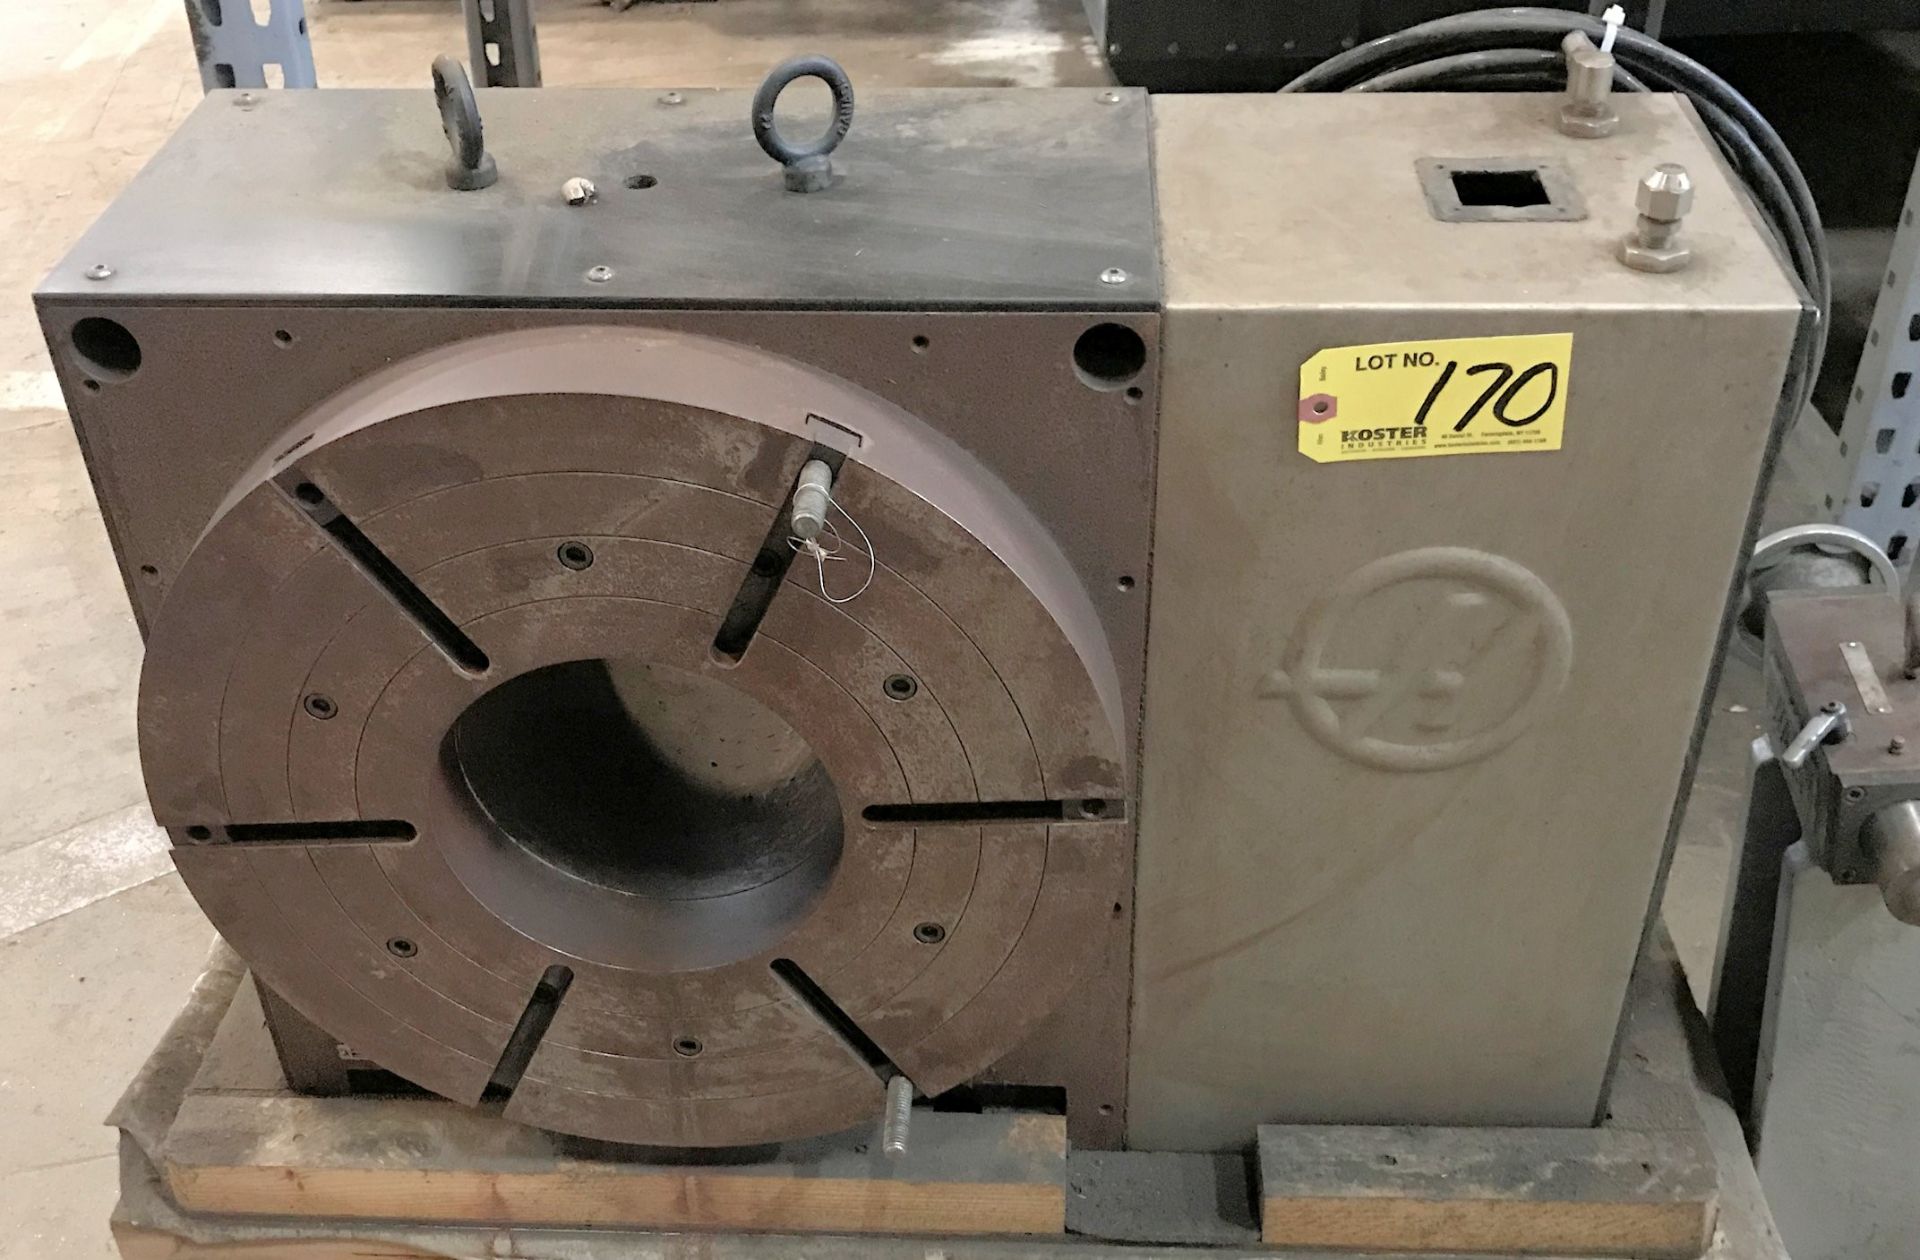 HAAS HRT 450 4TH AXIS ROTARY TABLE, 17.7" PLATTER DIAMETER, 850 LBS WEIGHT CAPACITY, 11.5" CENTER